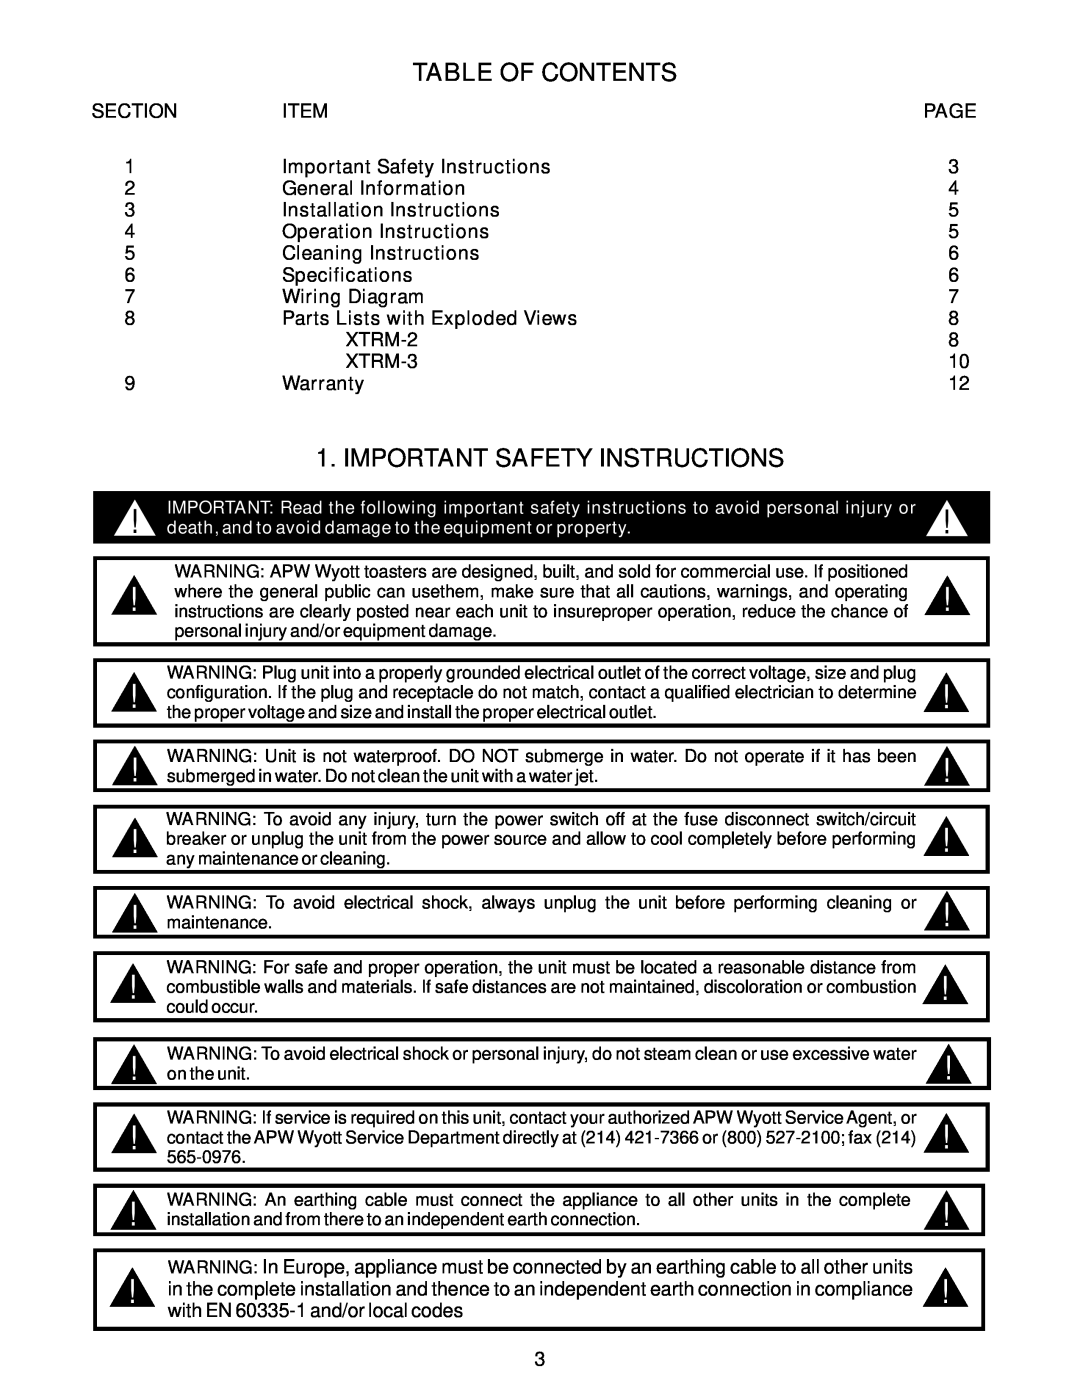 APW Wyott XTRM-3, XTRM-2 operating instructions Table Of Contents, Important Safety Instructions 